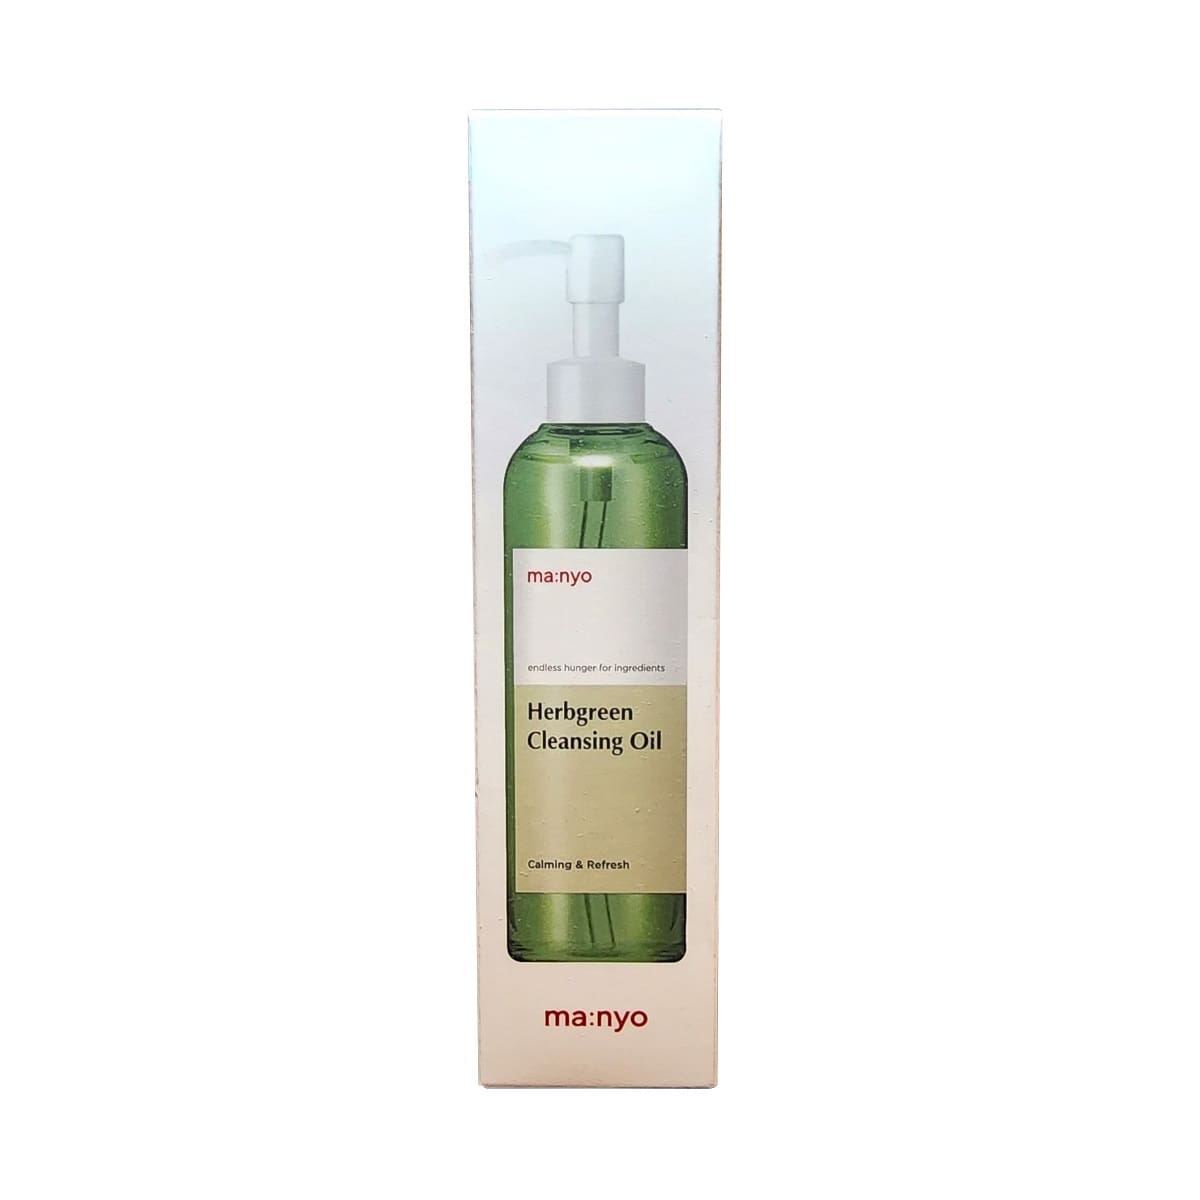 Product label for ma:nyo Herb Green Cleansing Oil (200 mL)